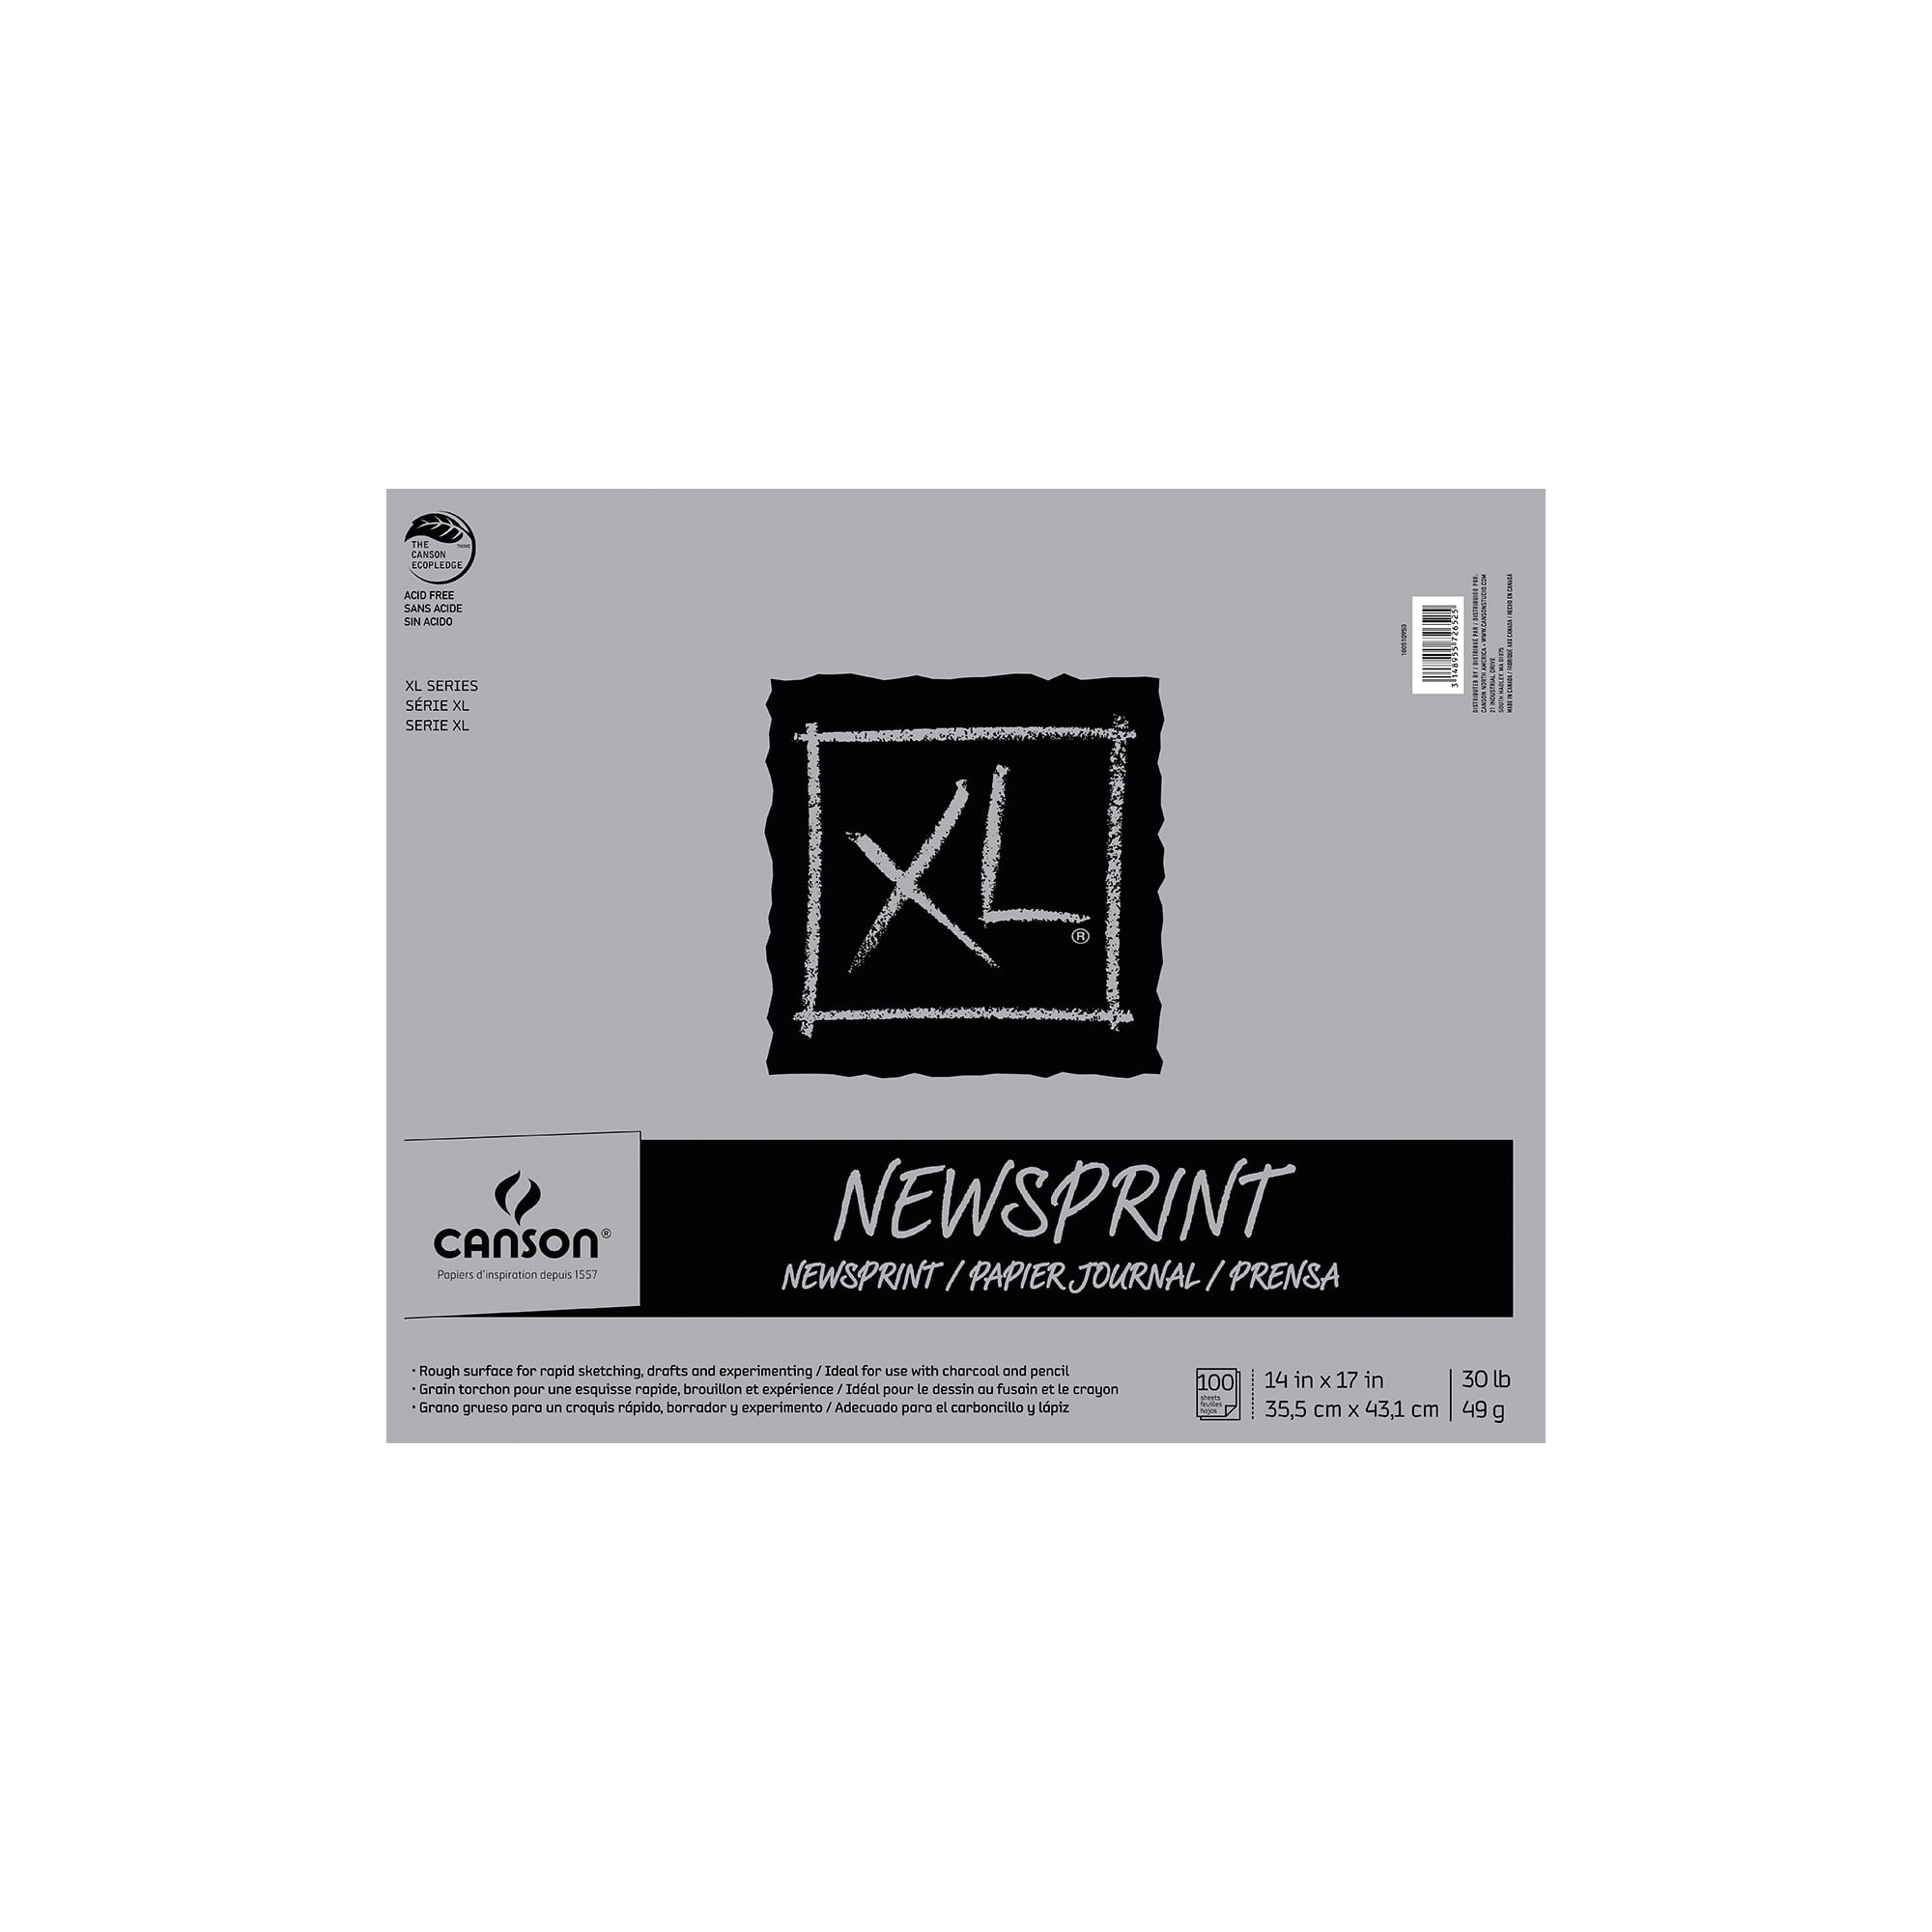 Canson XL Series Newsprint Paper, Foldover Pad, 9x12 inches, 100 Sheets  (30lb/49g) - Artist Paper for Adults and Students 9 x 12 (100 Sheets)